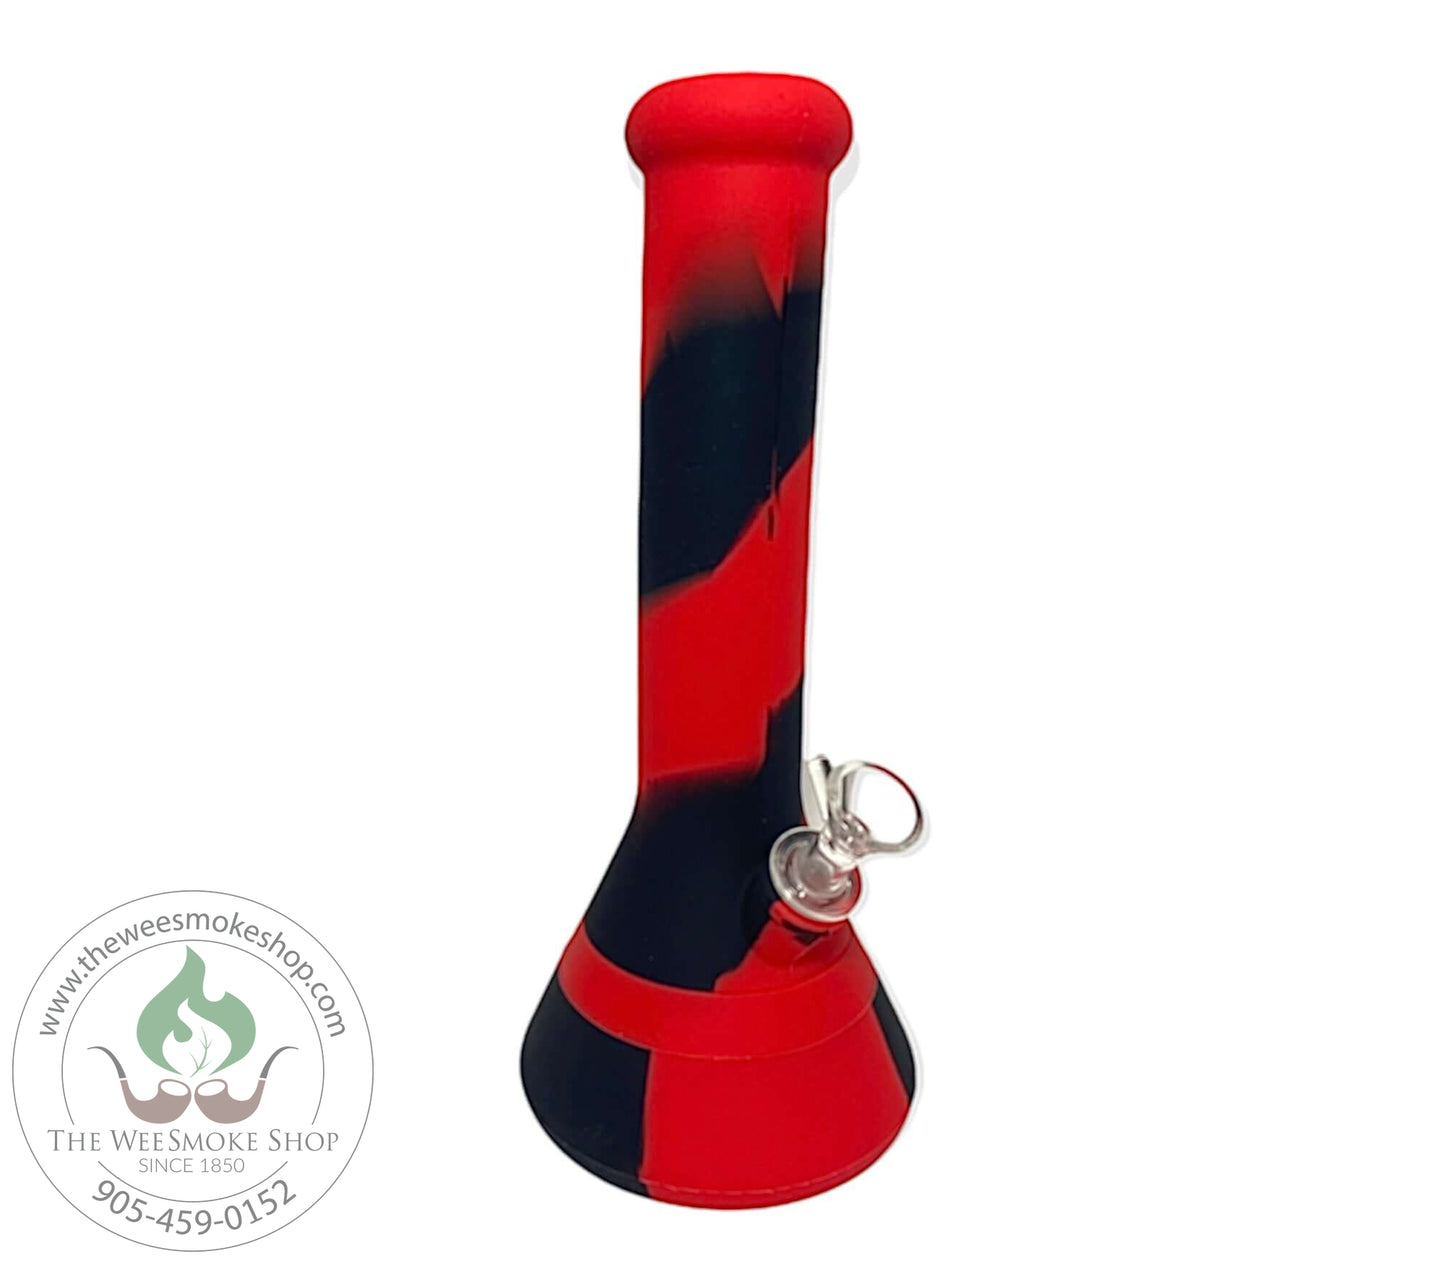  View details for 12" Multicolour Silicone Beaker Bong 12" Multicolour Silicone Beaker Bong-Silicone Bongs-The Wee Smoke Shop